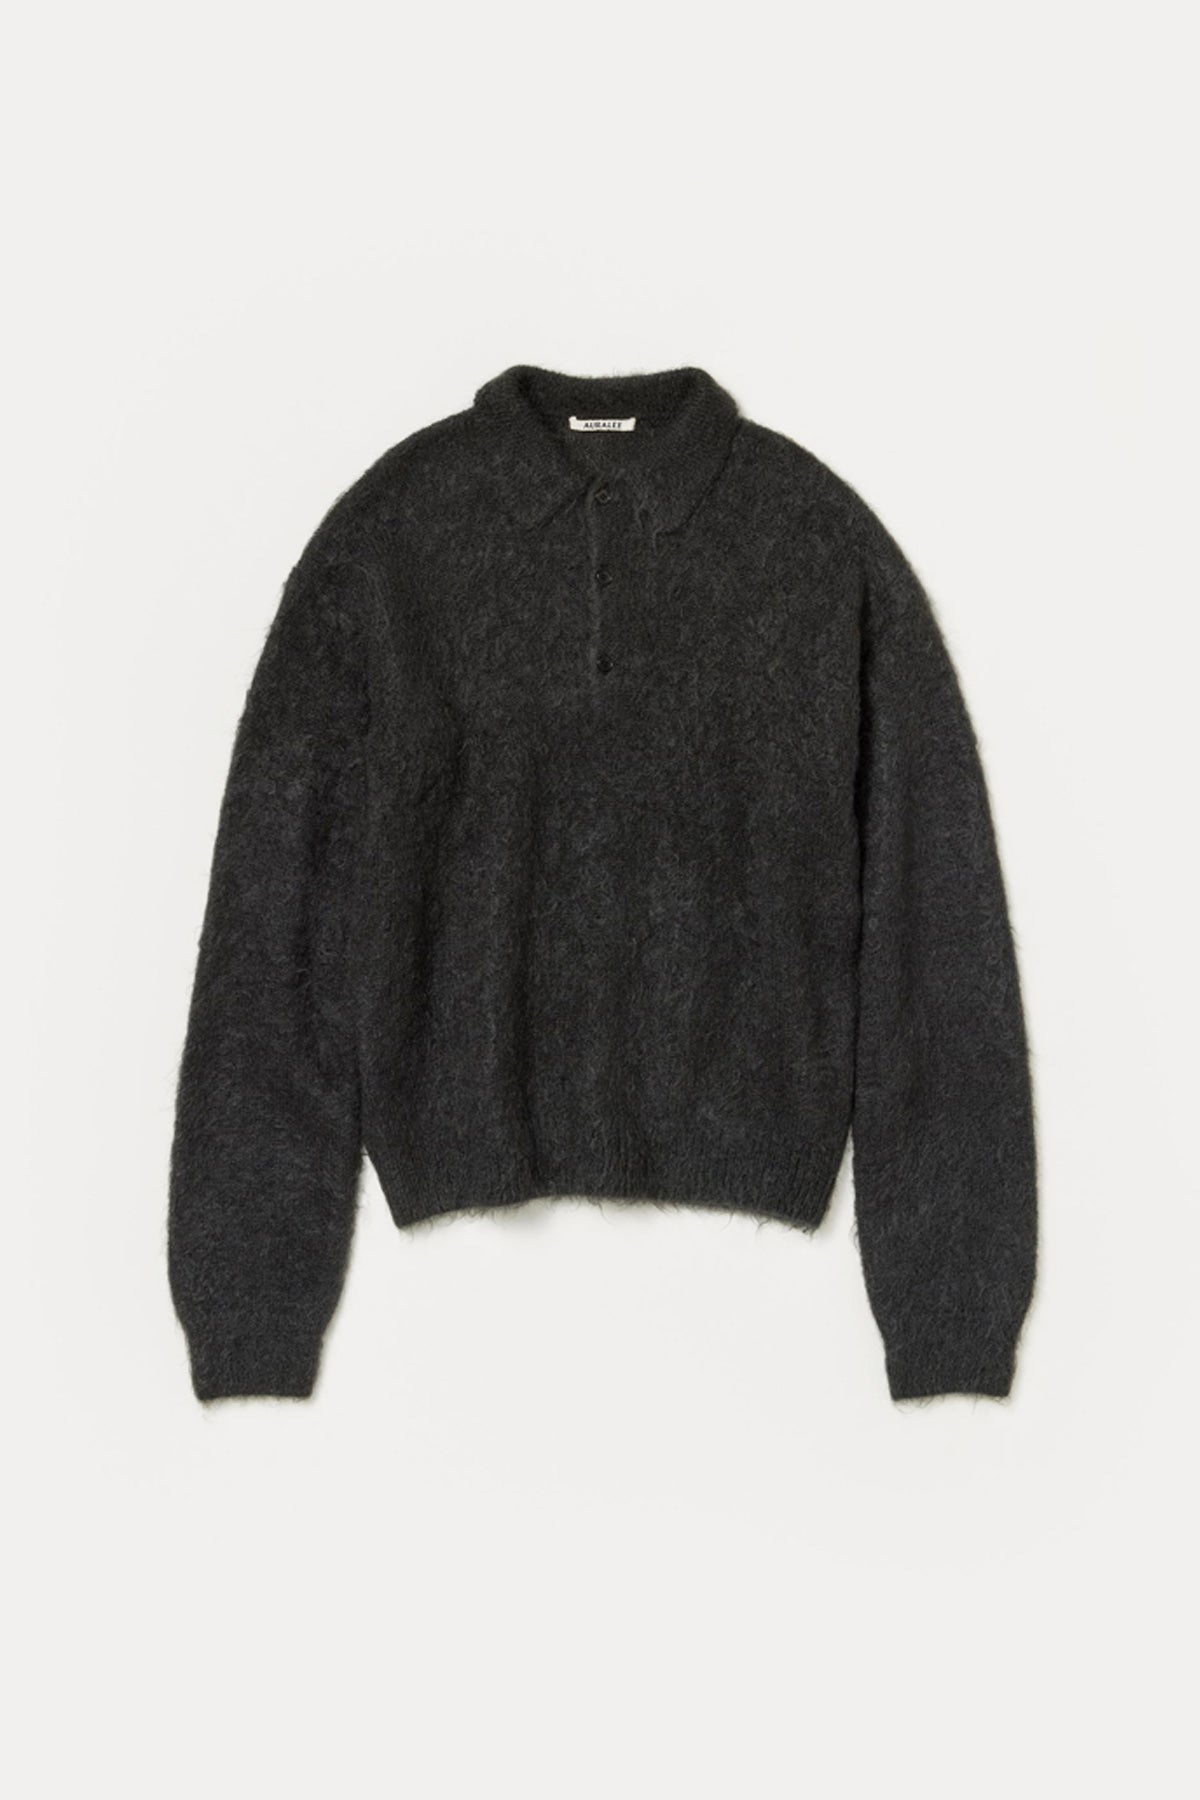 Brushed Super Kid Mohair Knit Polo - Ink Black